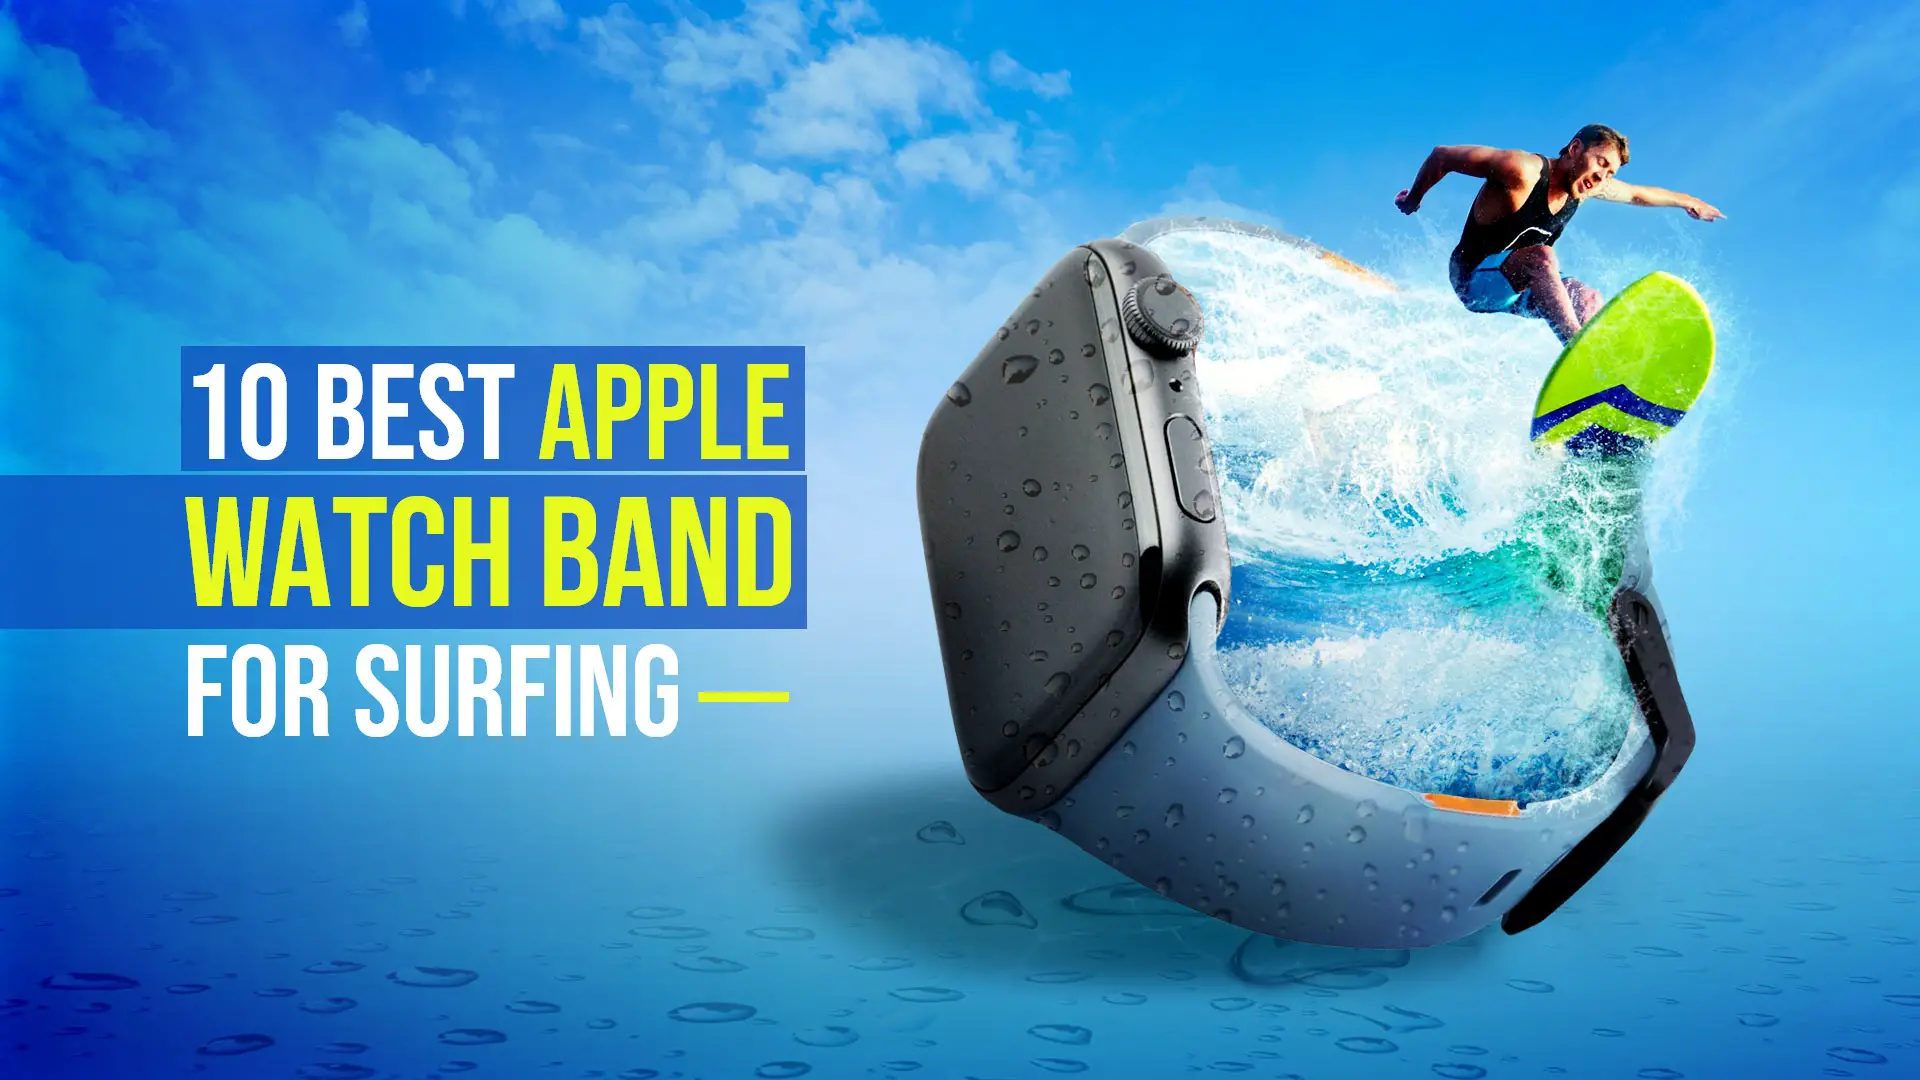 10 Best Apple Watch Band for Surfing